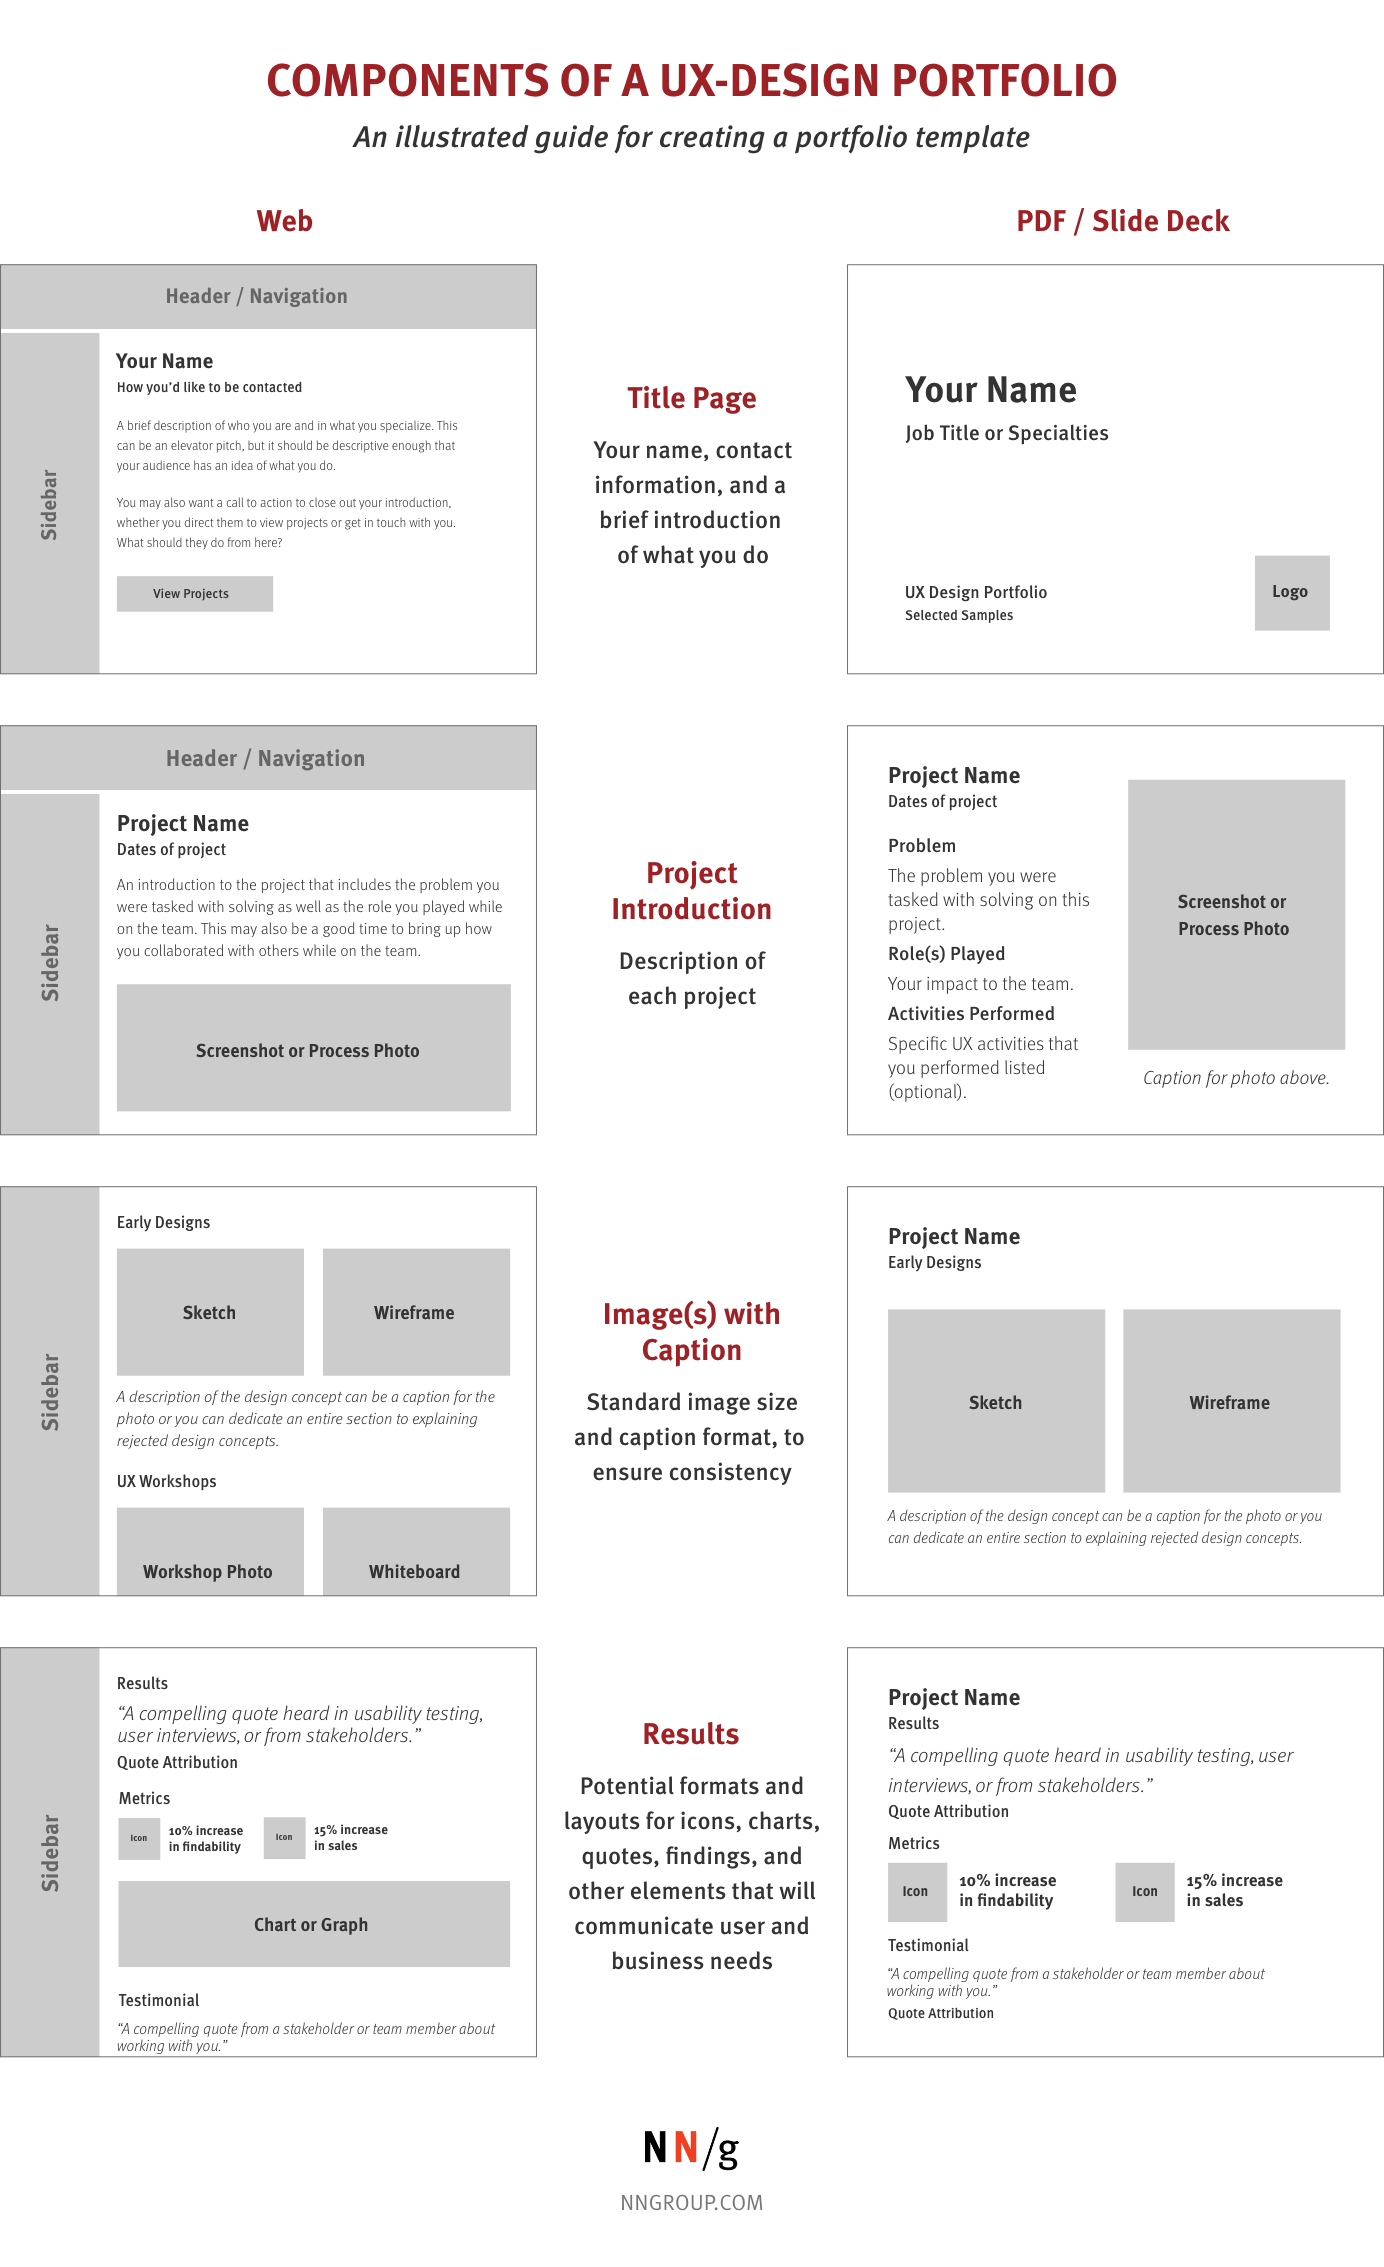 5 Steps To Creating A Ux Design Portfolio For Ux Report Template